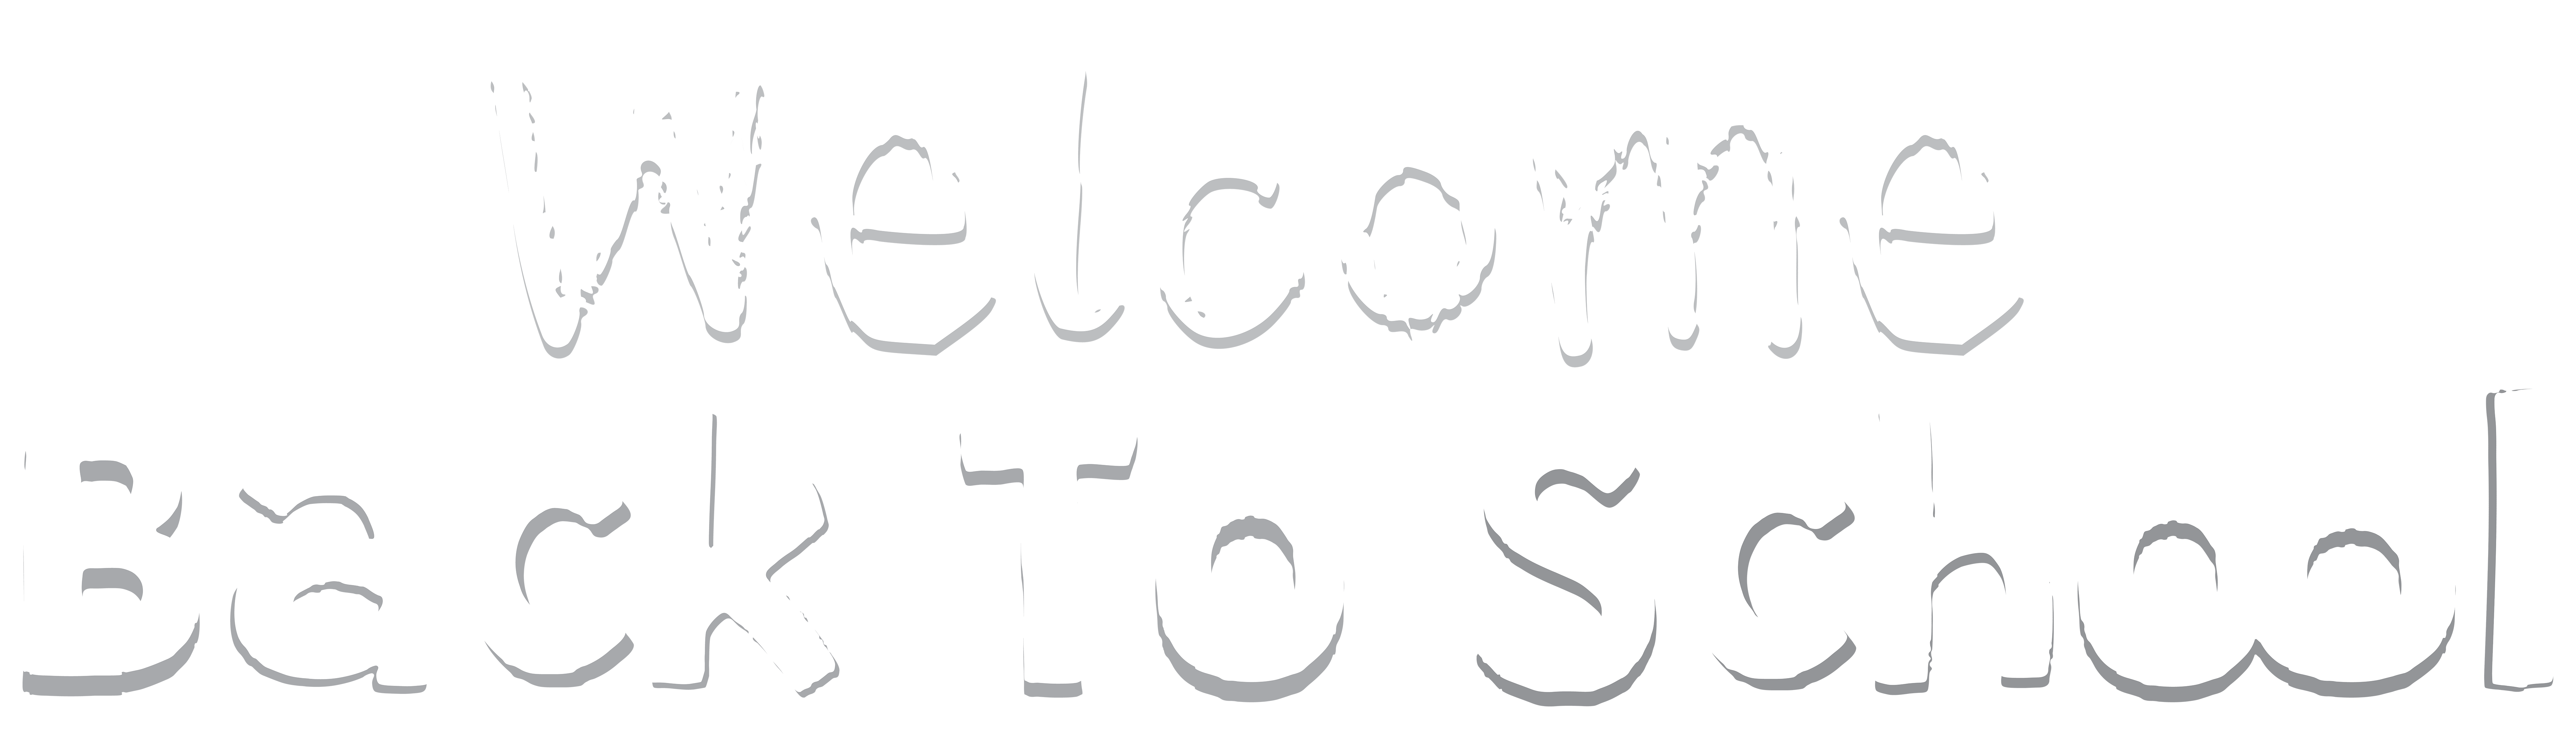 Welcome Clipart Images, Free Download